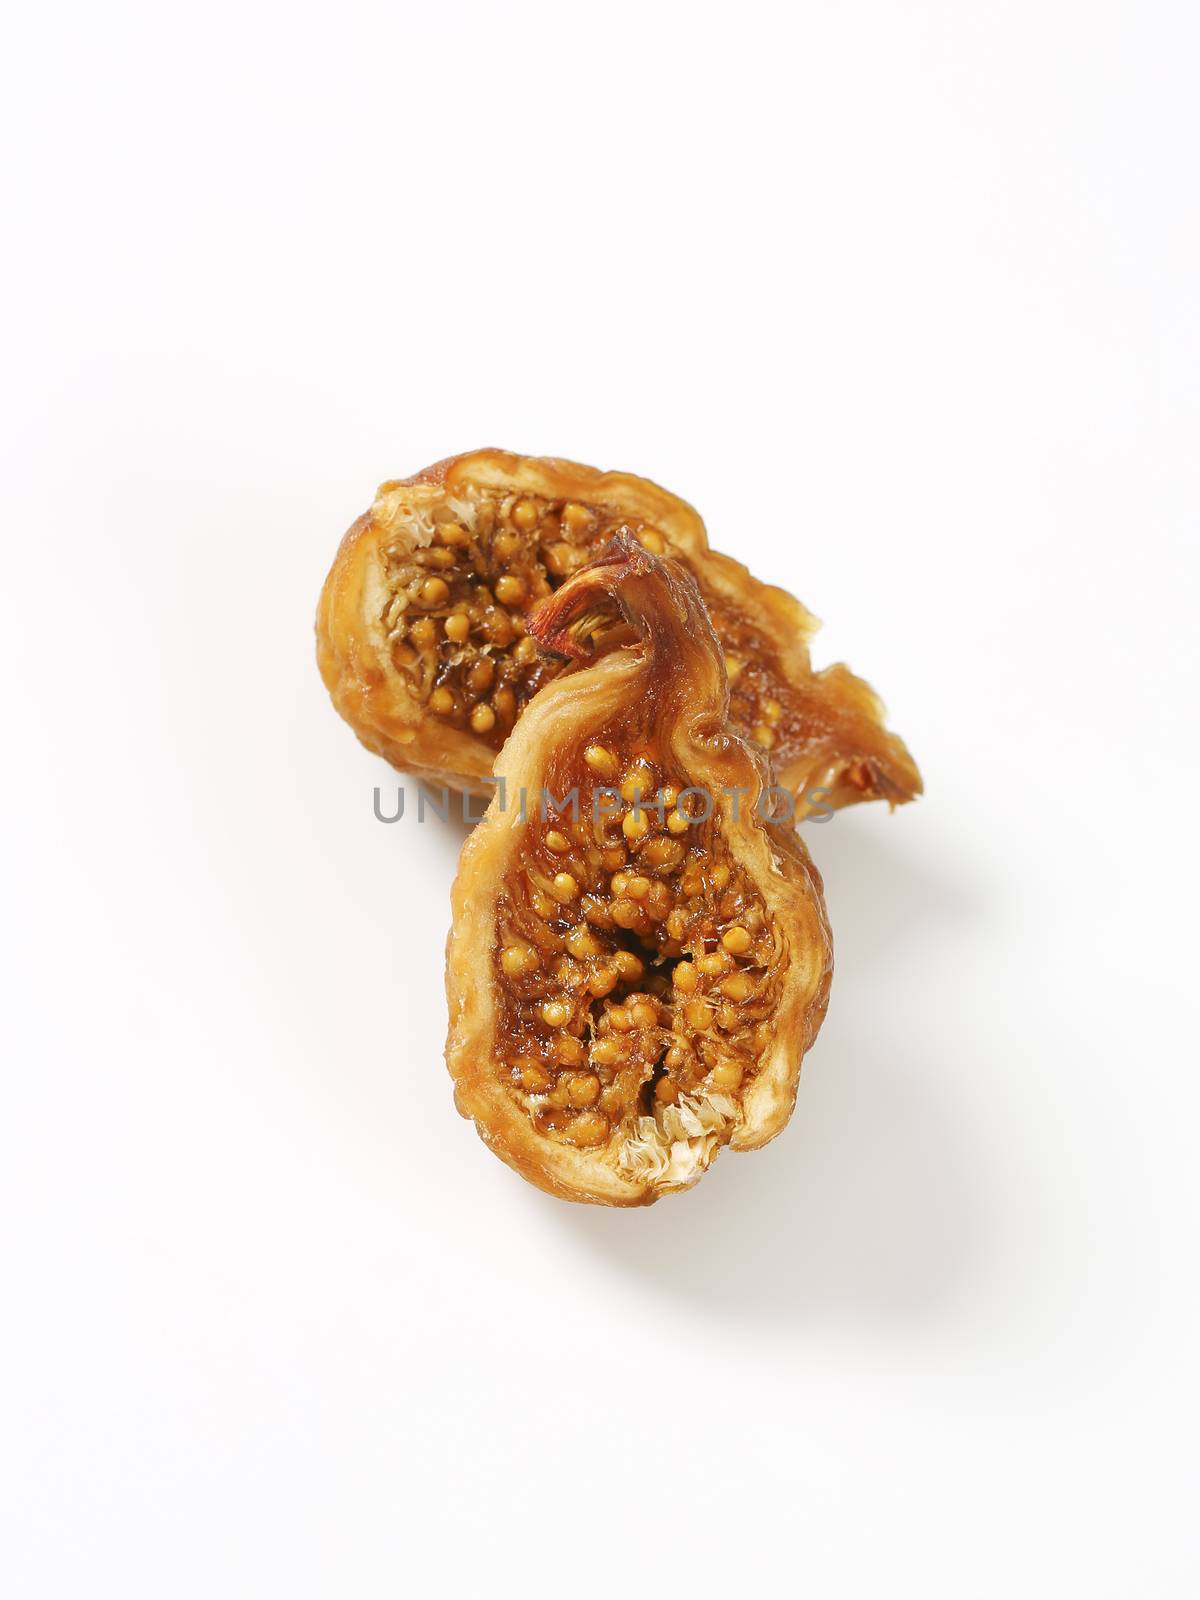 halved dried fig on white background